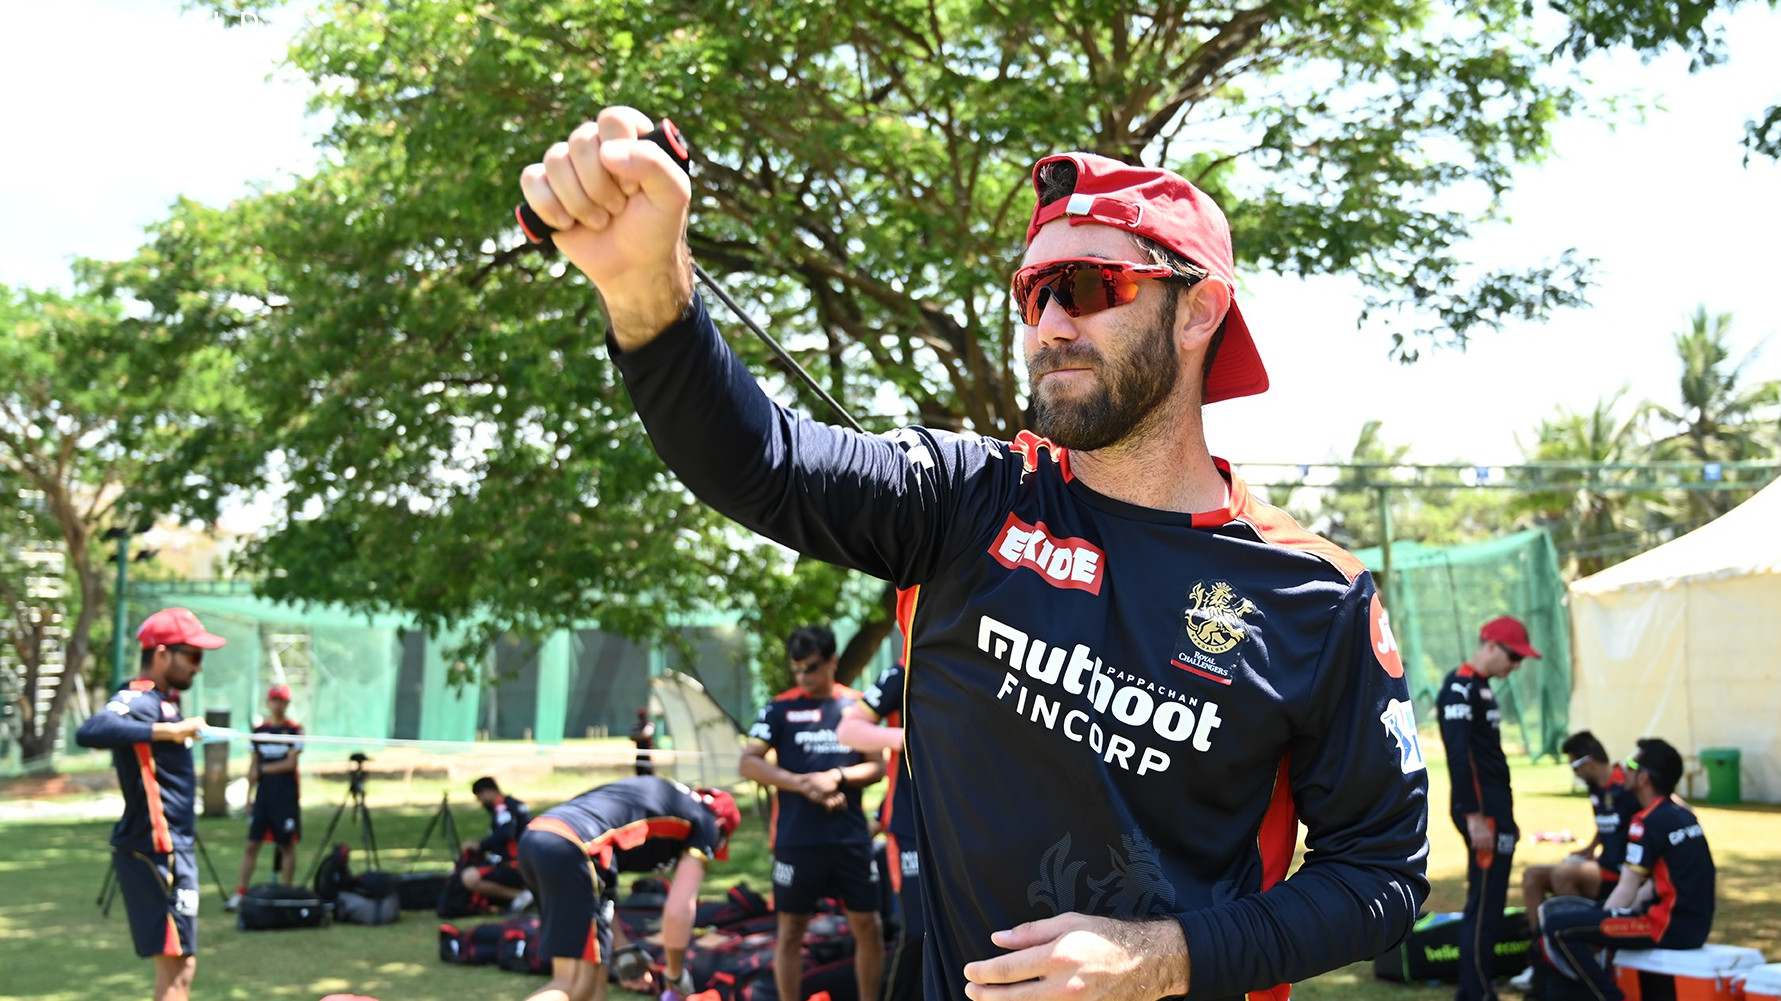 IPL 2021: Glenn Maxwell says Australian cricketers might fly to UK with India, England players